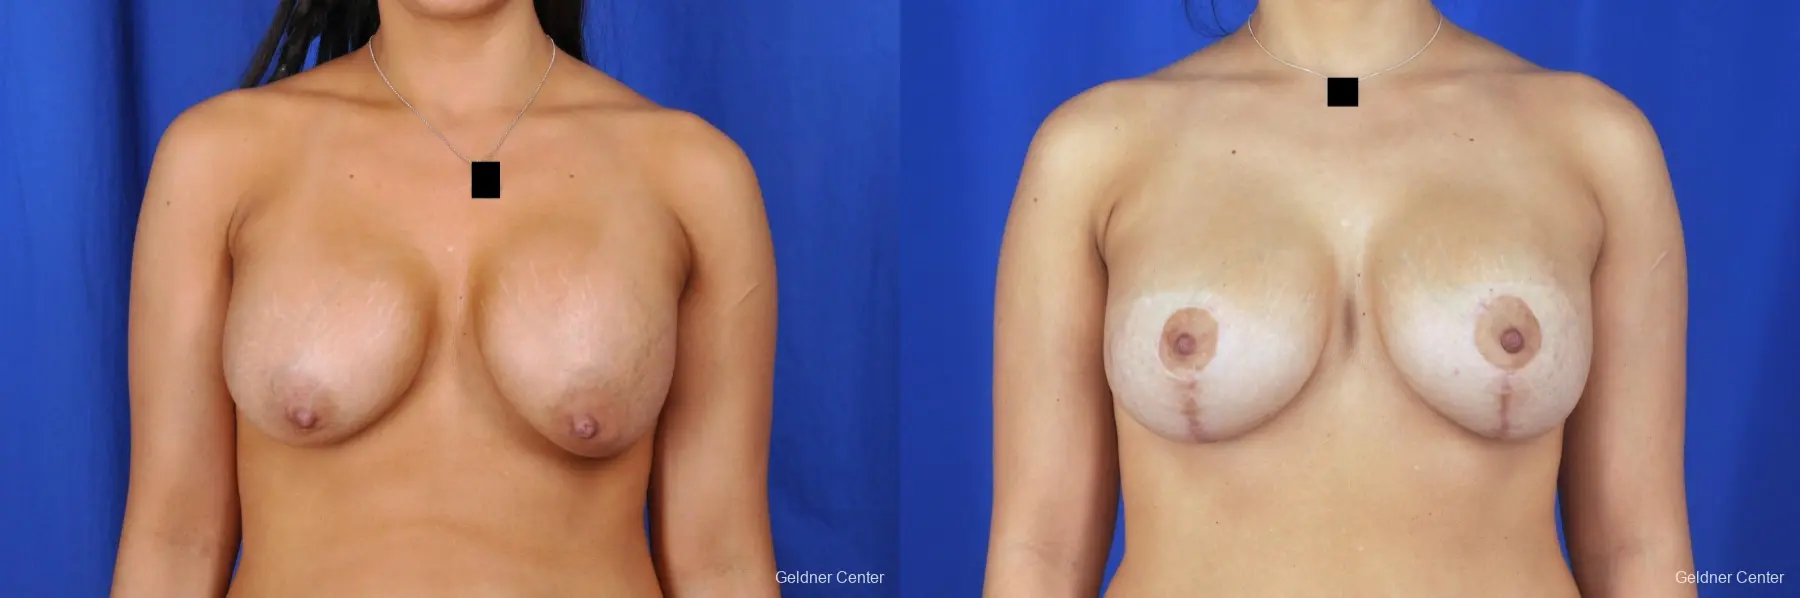 Chicago Breast Lift 2059 - Before and After